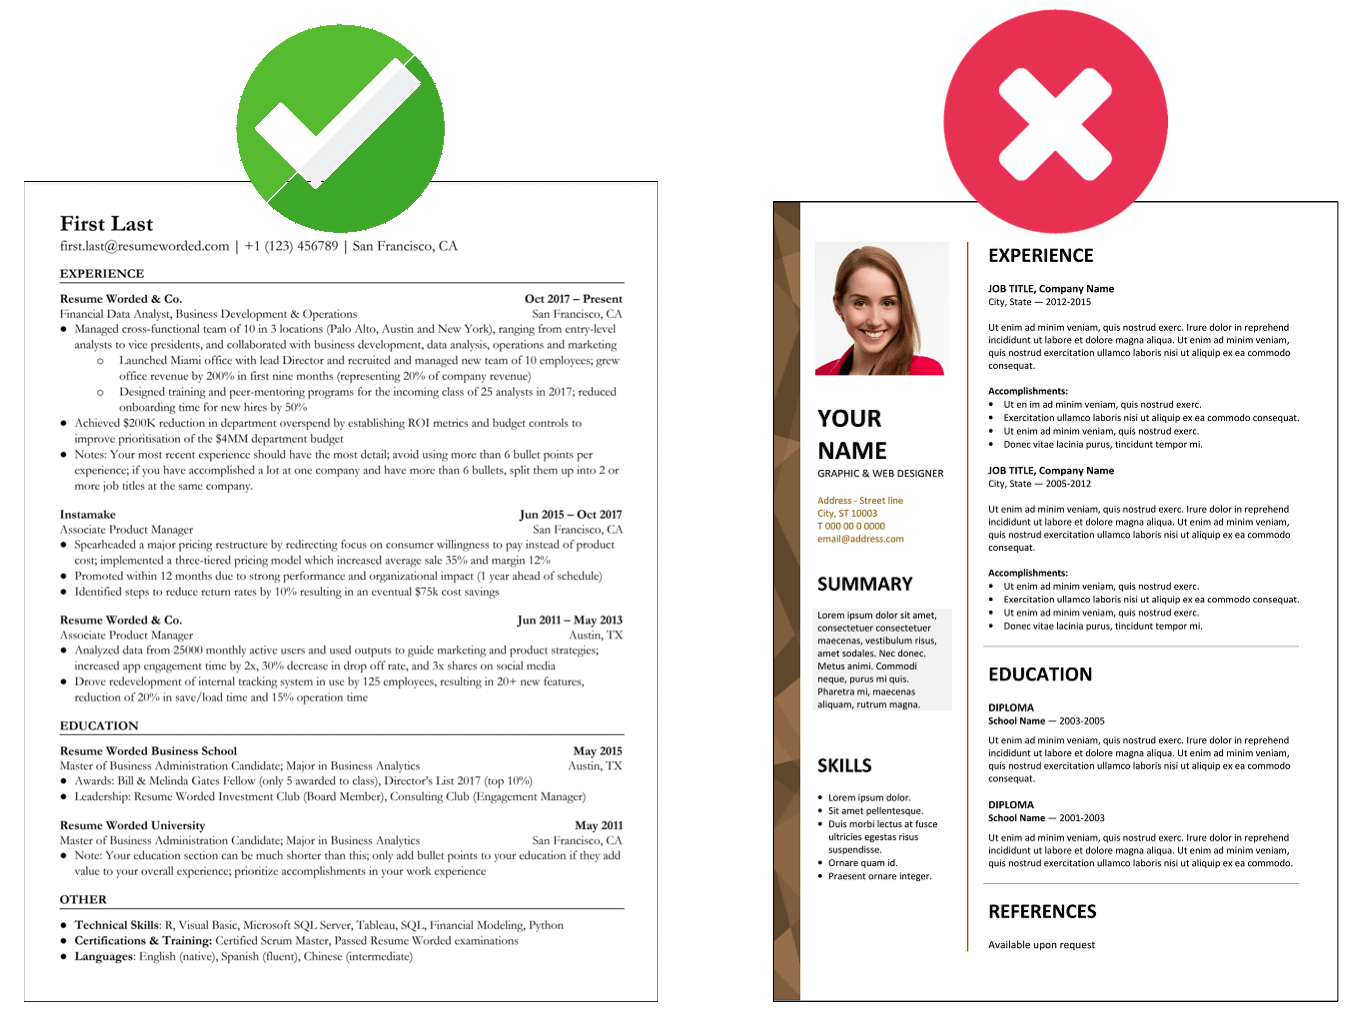 Marketing Manager Resume Example For 2022 Resume Worded